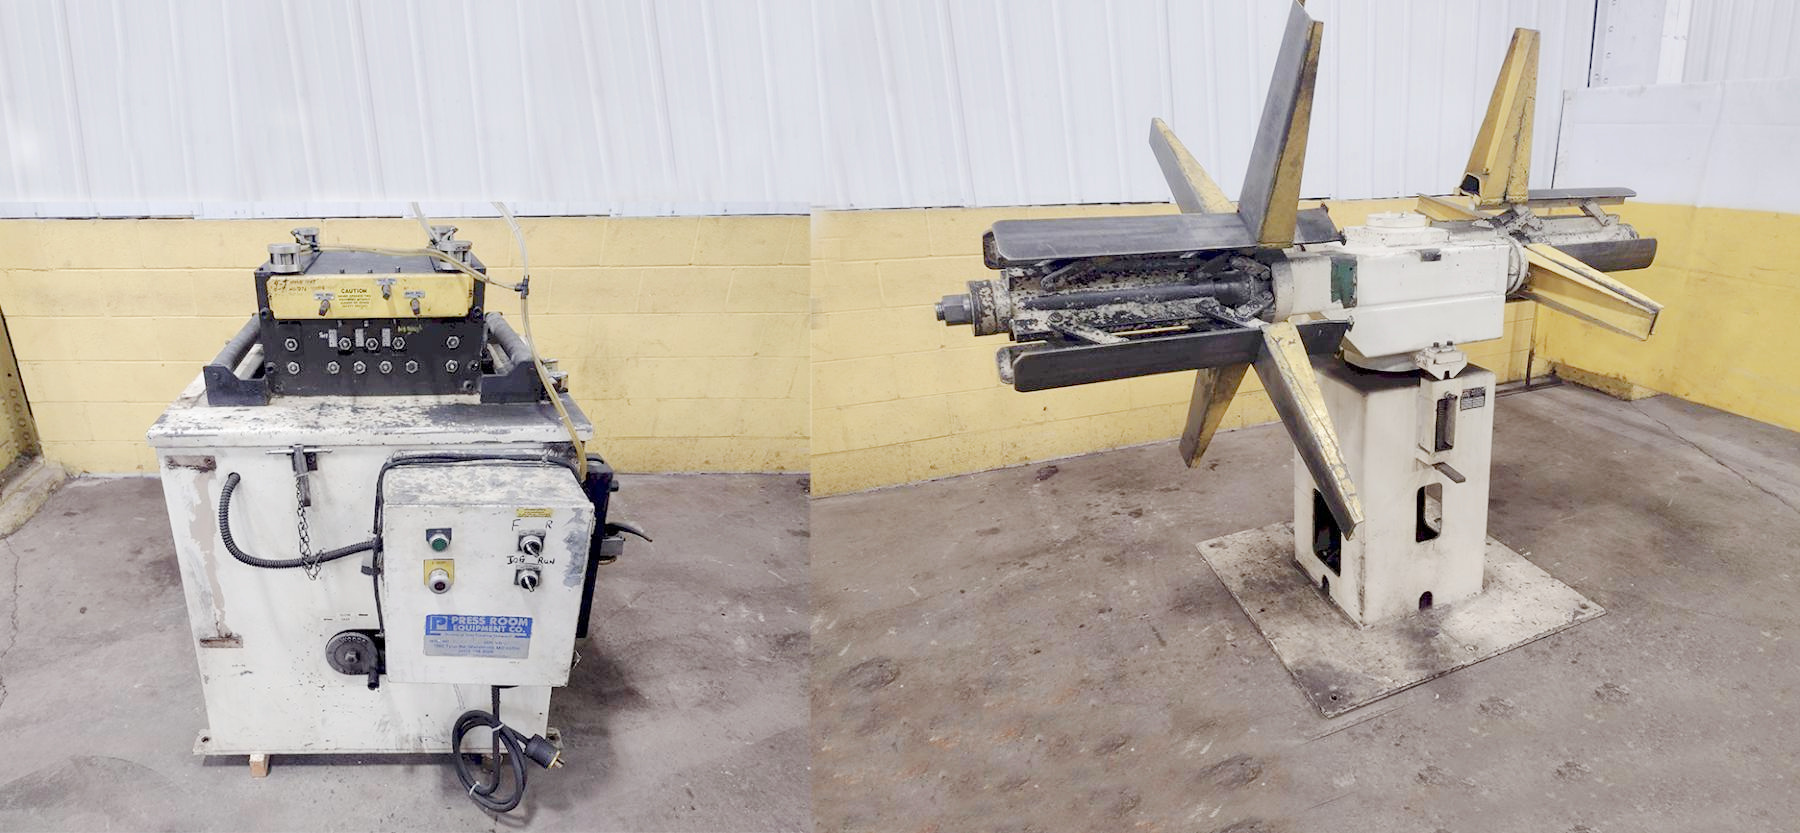 Mecon Double End Pull Off Uncoiler & Powered Straightener (used) Item # UE-011322M (Ohio)